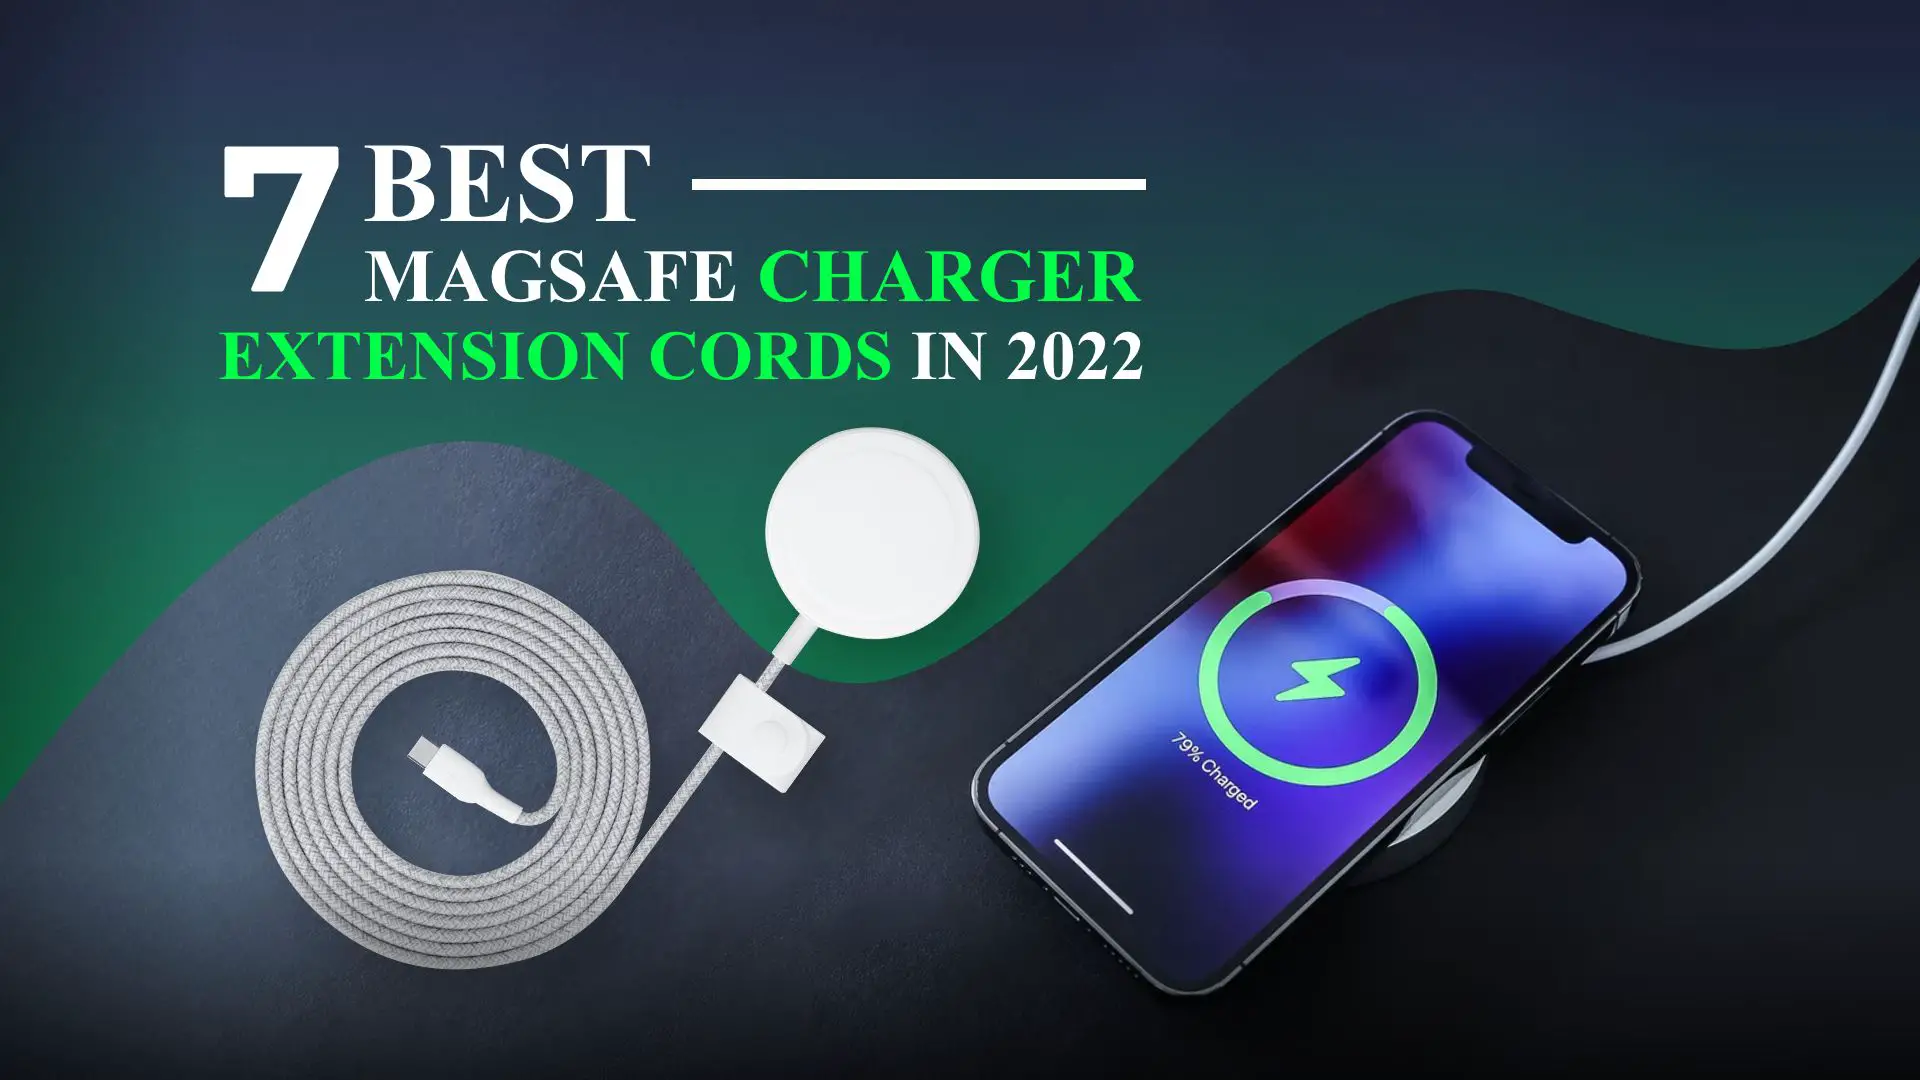 7 best MagSafe Charger Extension Cords in 2022